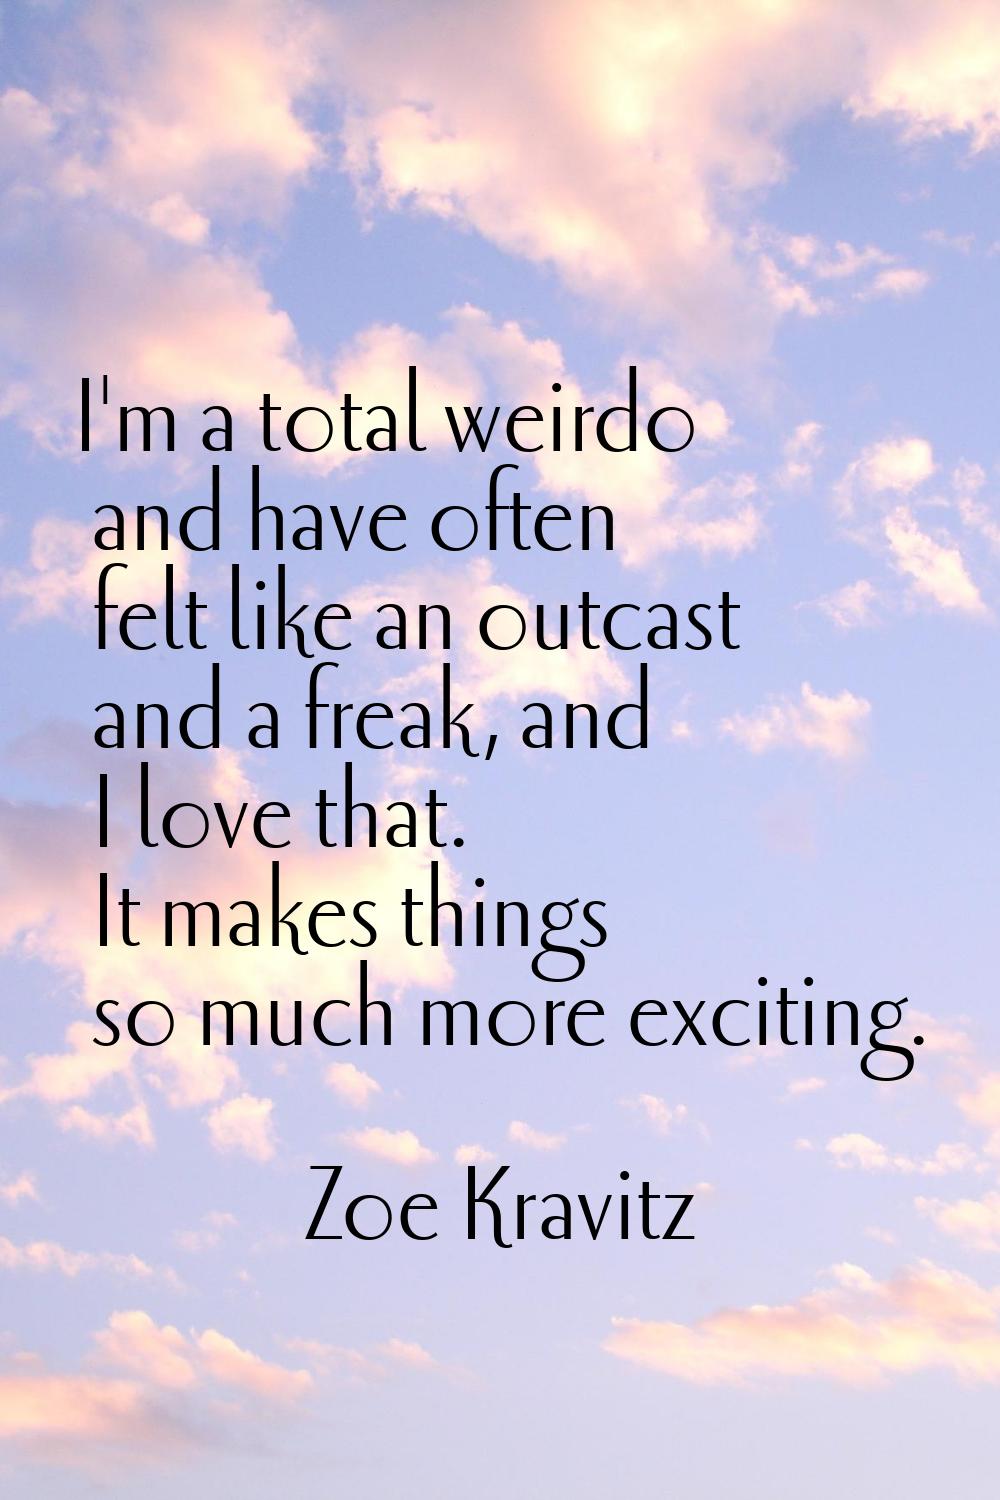 I'm a total weirdo and have often felt like an outcast and a freak, and I love that. It makes thing